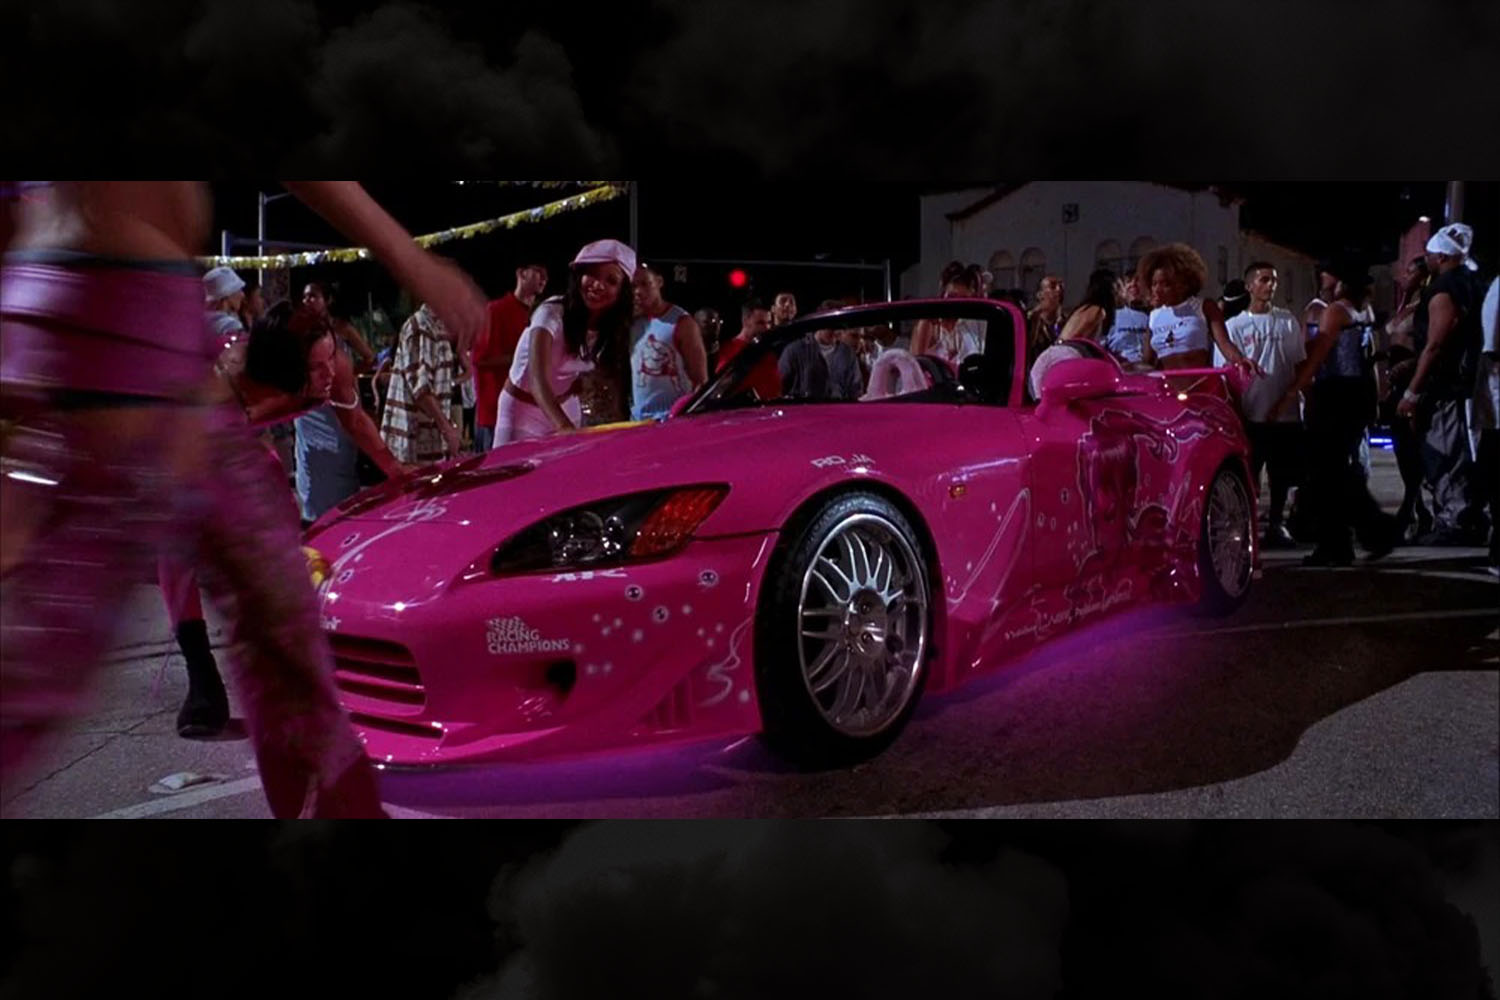 Suki's pink 2000 Honda S2000 from 2 Fast 2 Furious with underglow lighting is one of our favorite from the Fast and Furious franchise